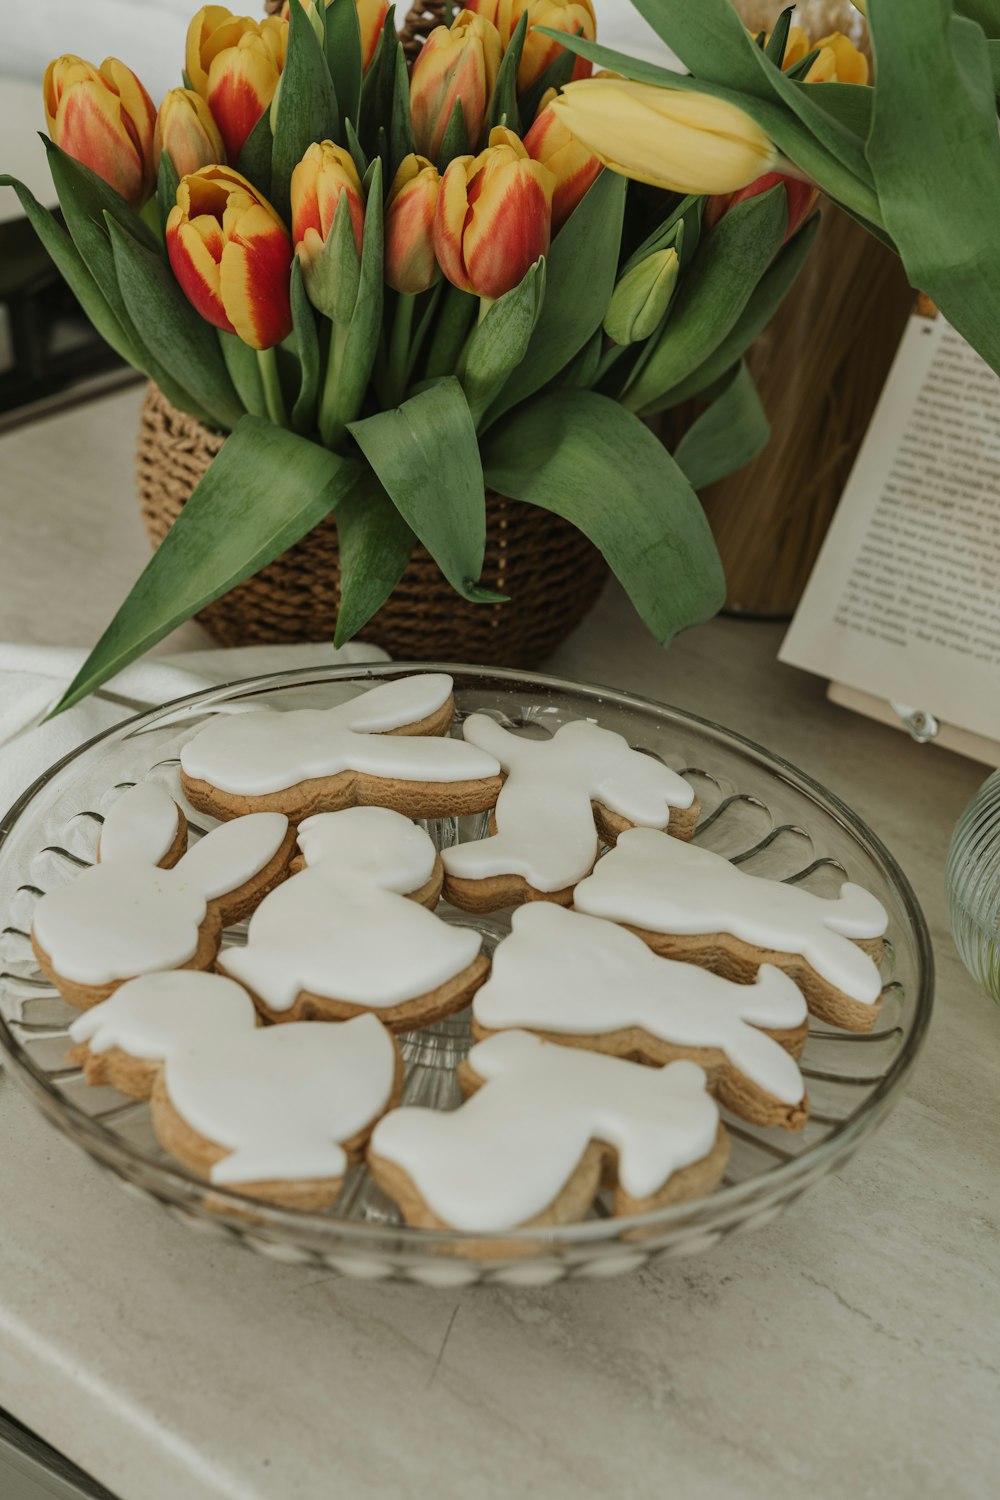 a plate of cookies and flowers on a table